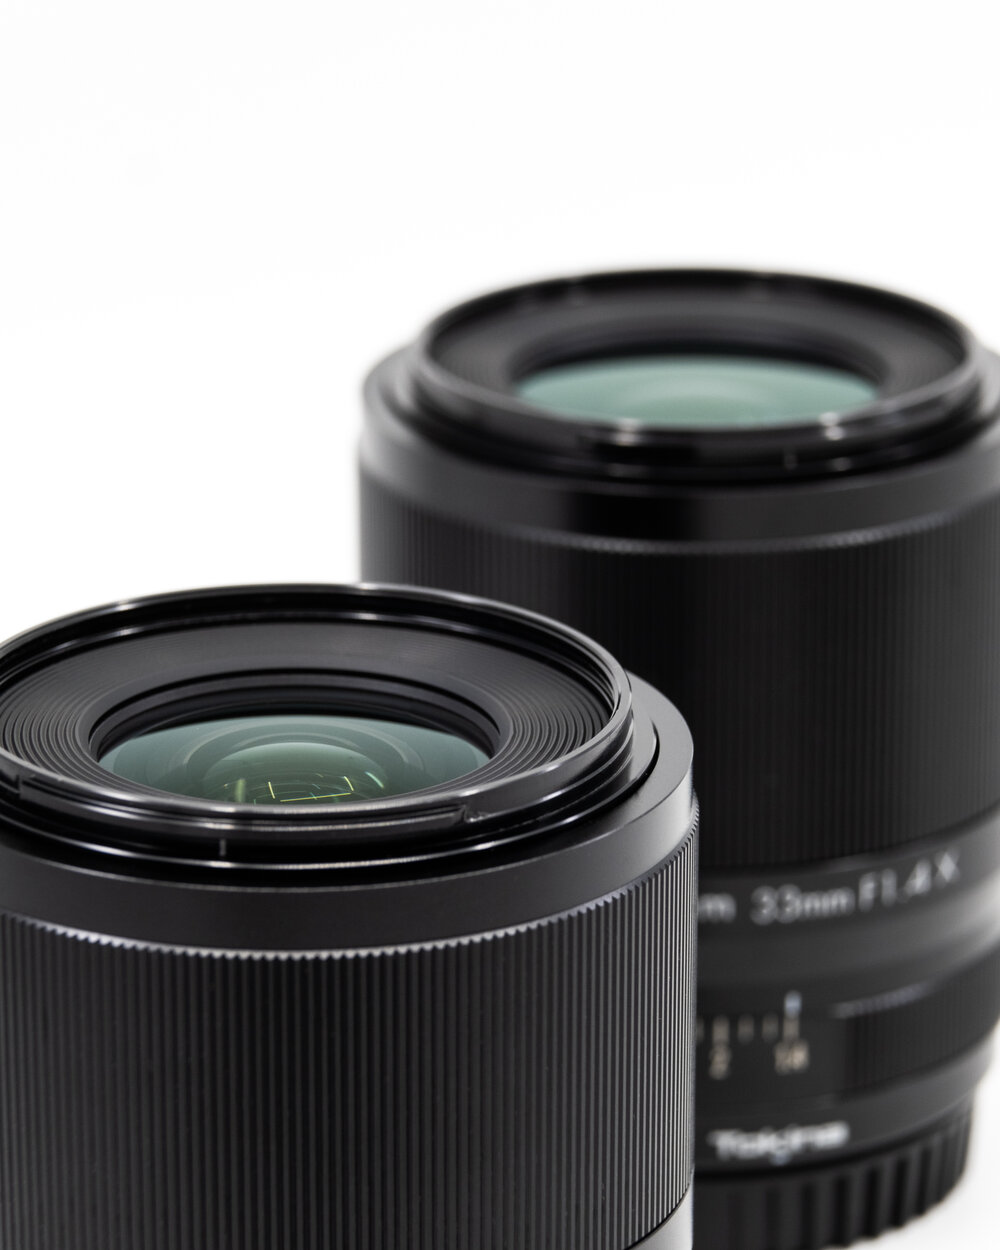 Should you buy the Tokina atx-m 23mm f/1.4 and atx-m 33mm f/1.4